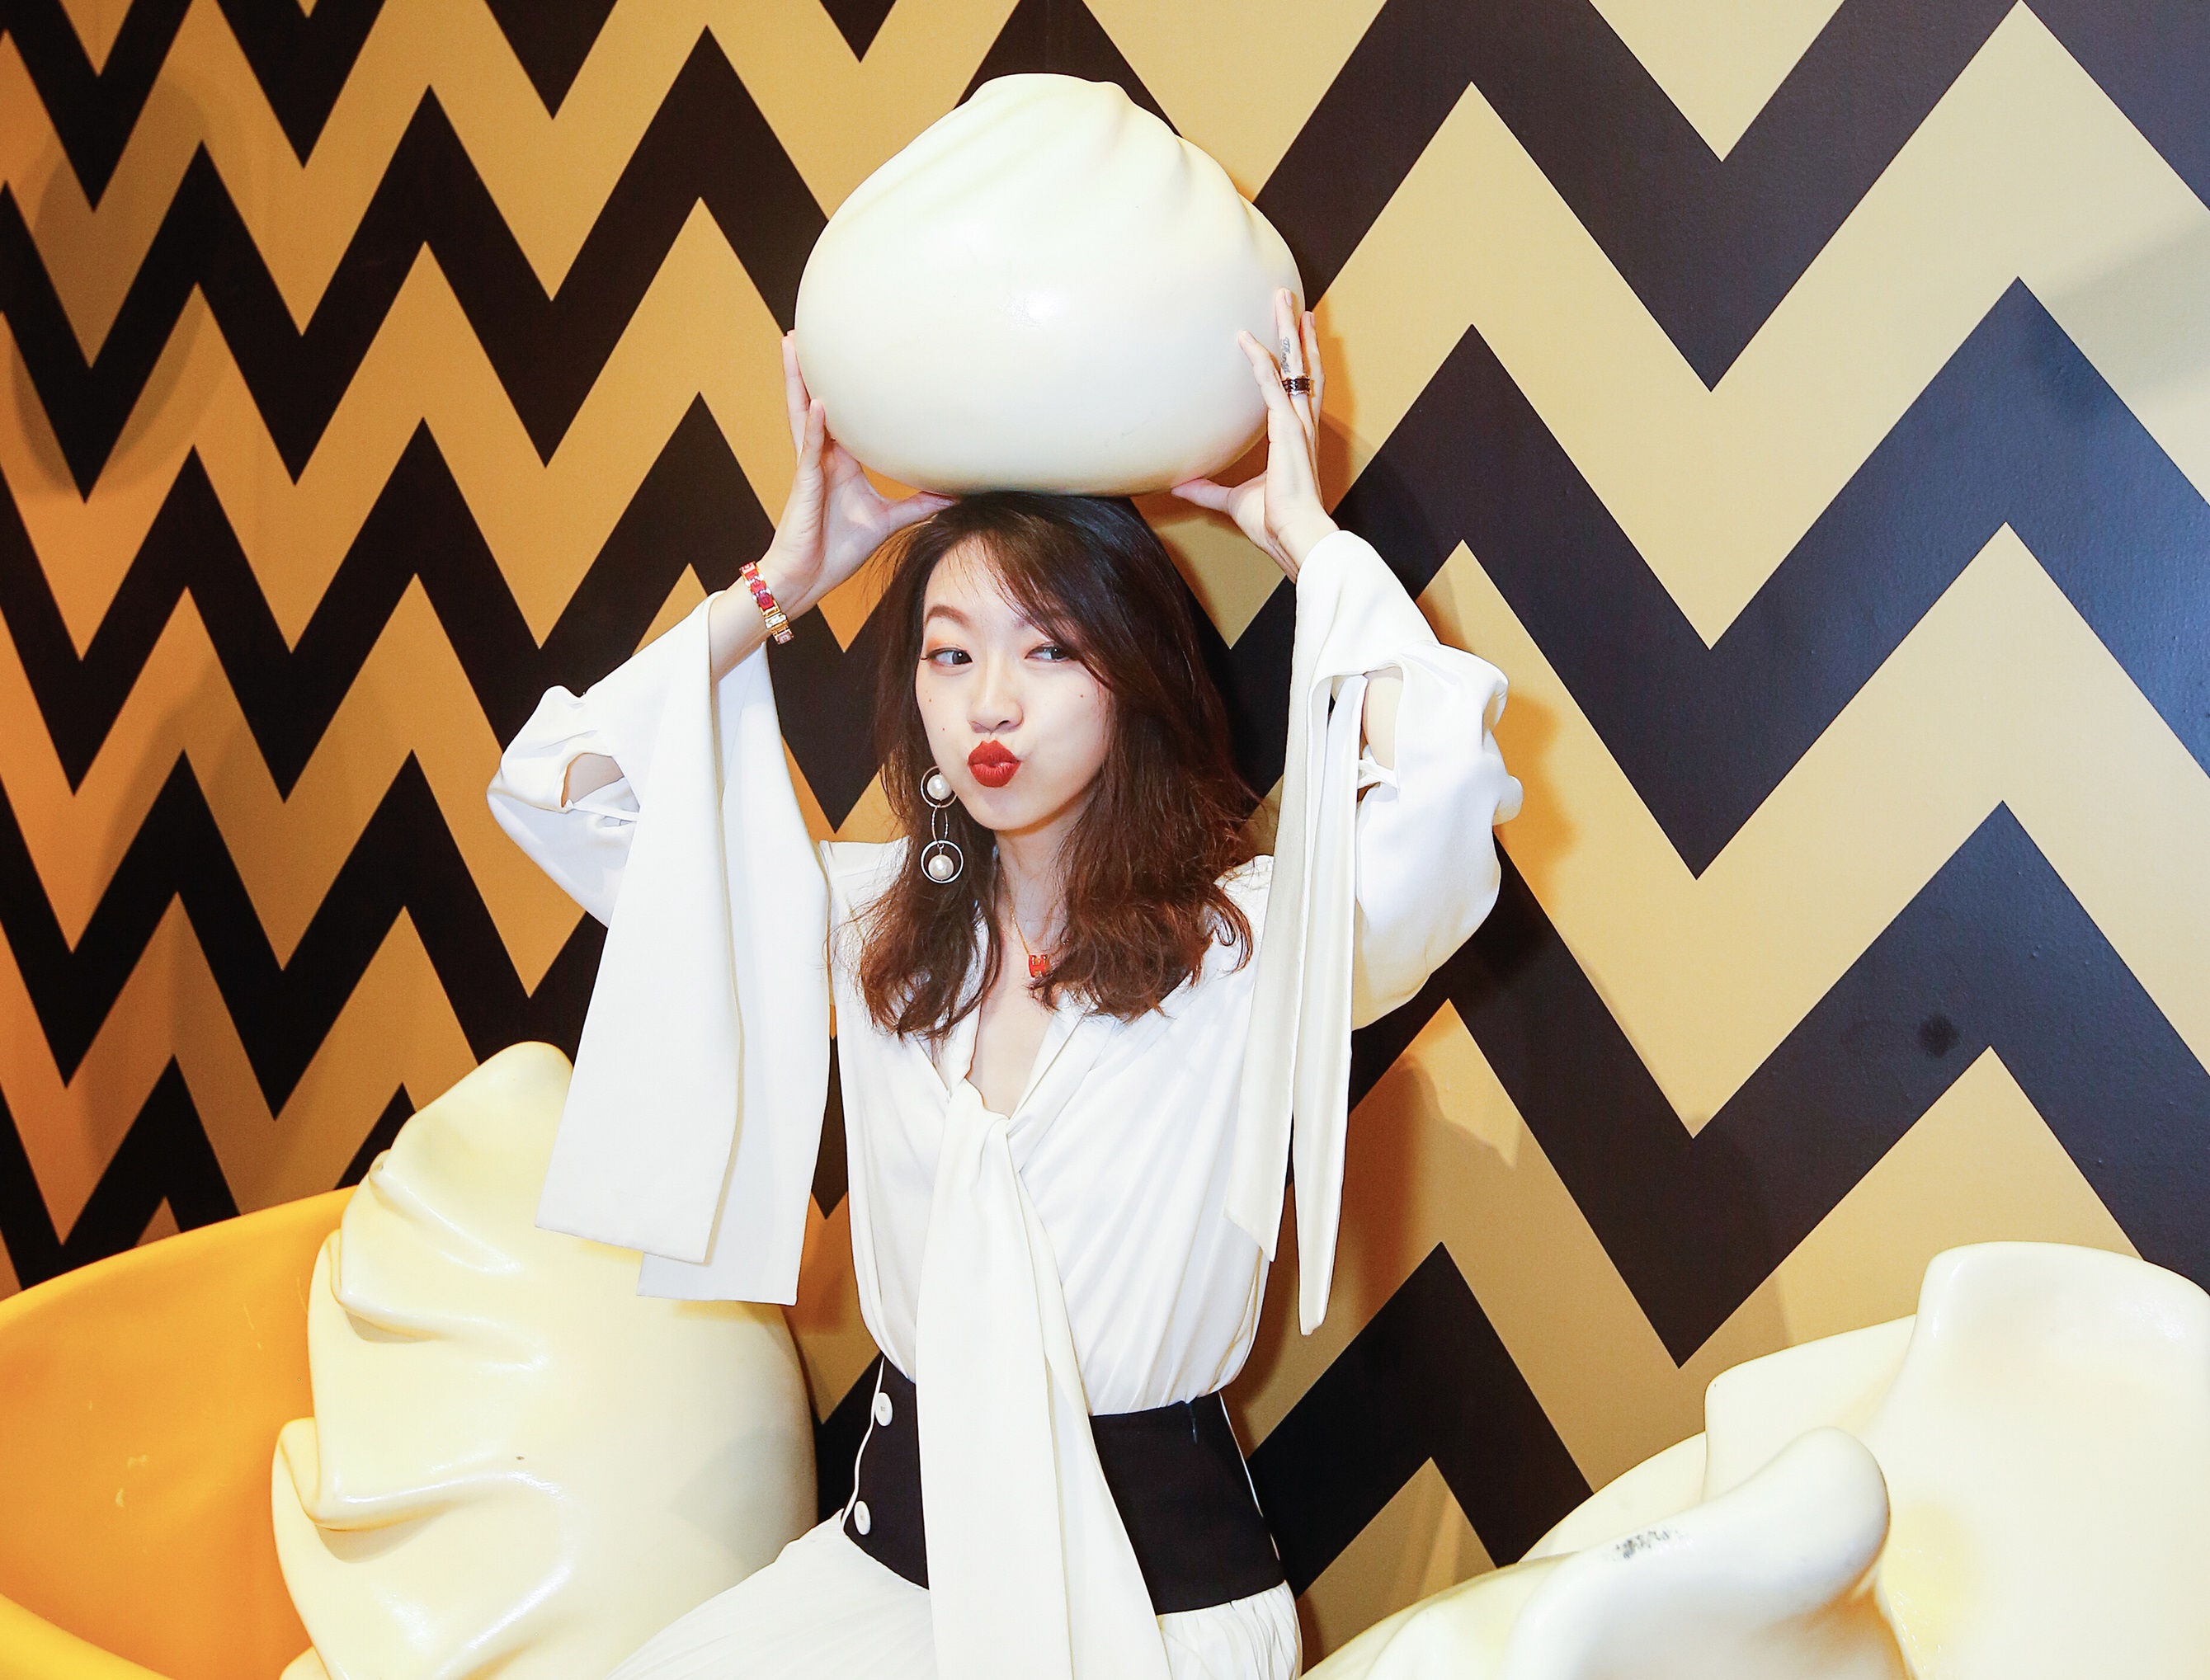 Woman holding a giant fake dumpling in a bowl of dumplings with a black and yellow background.